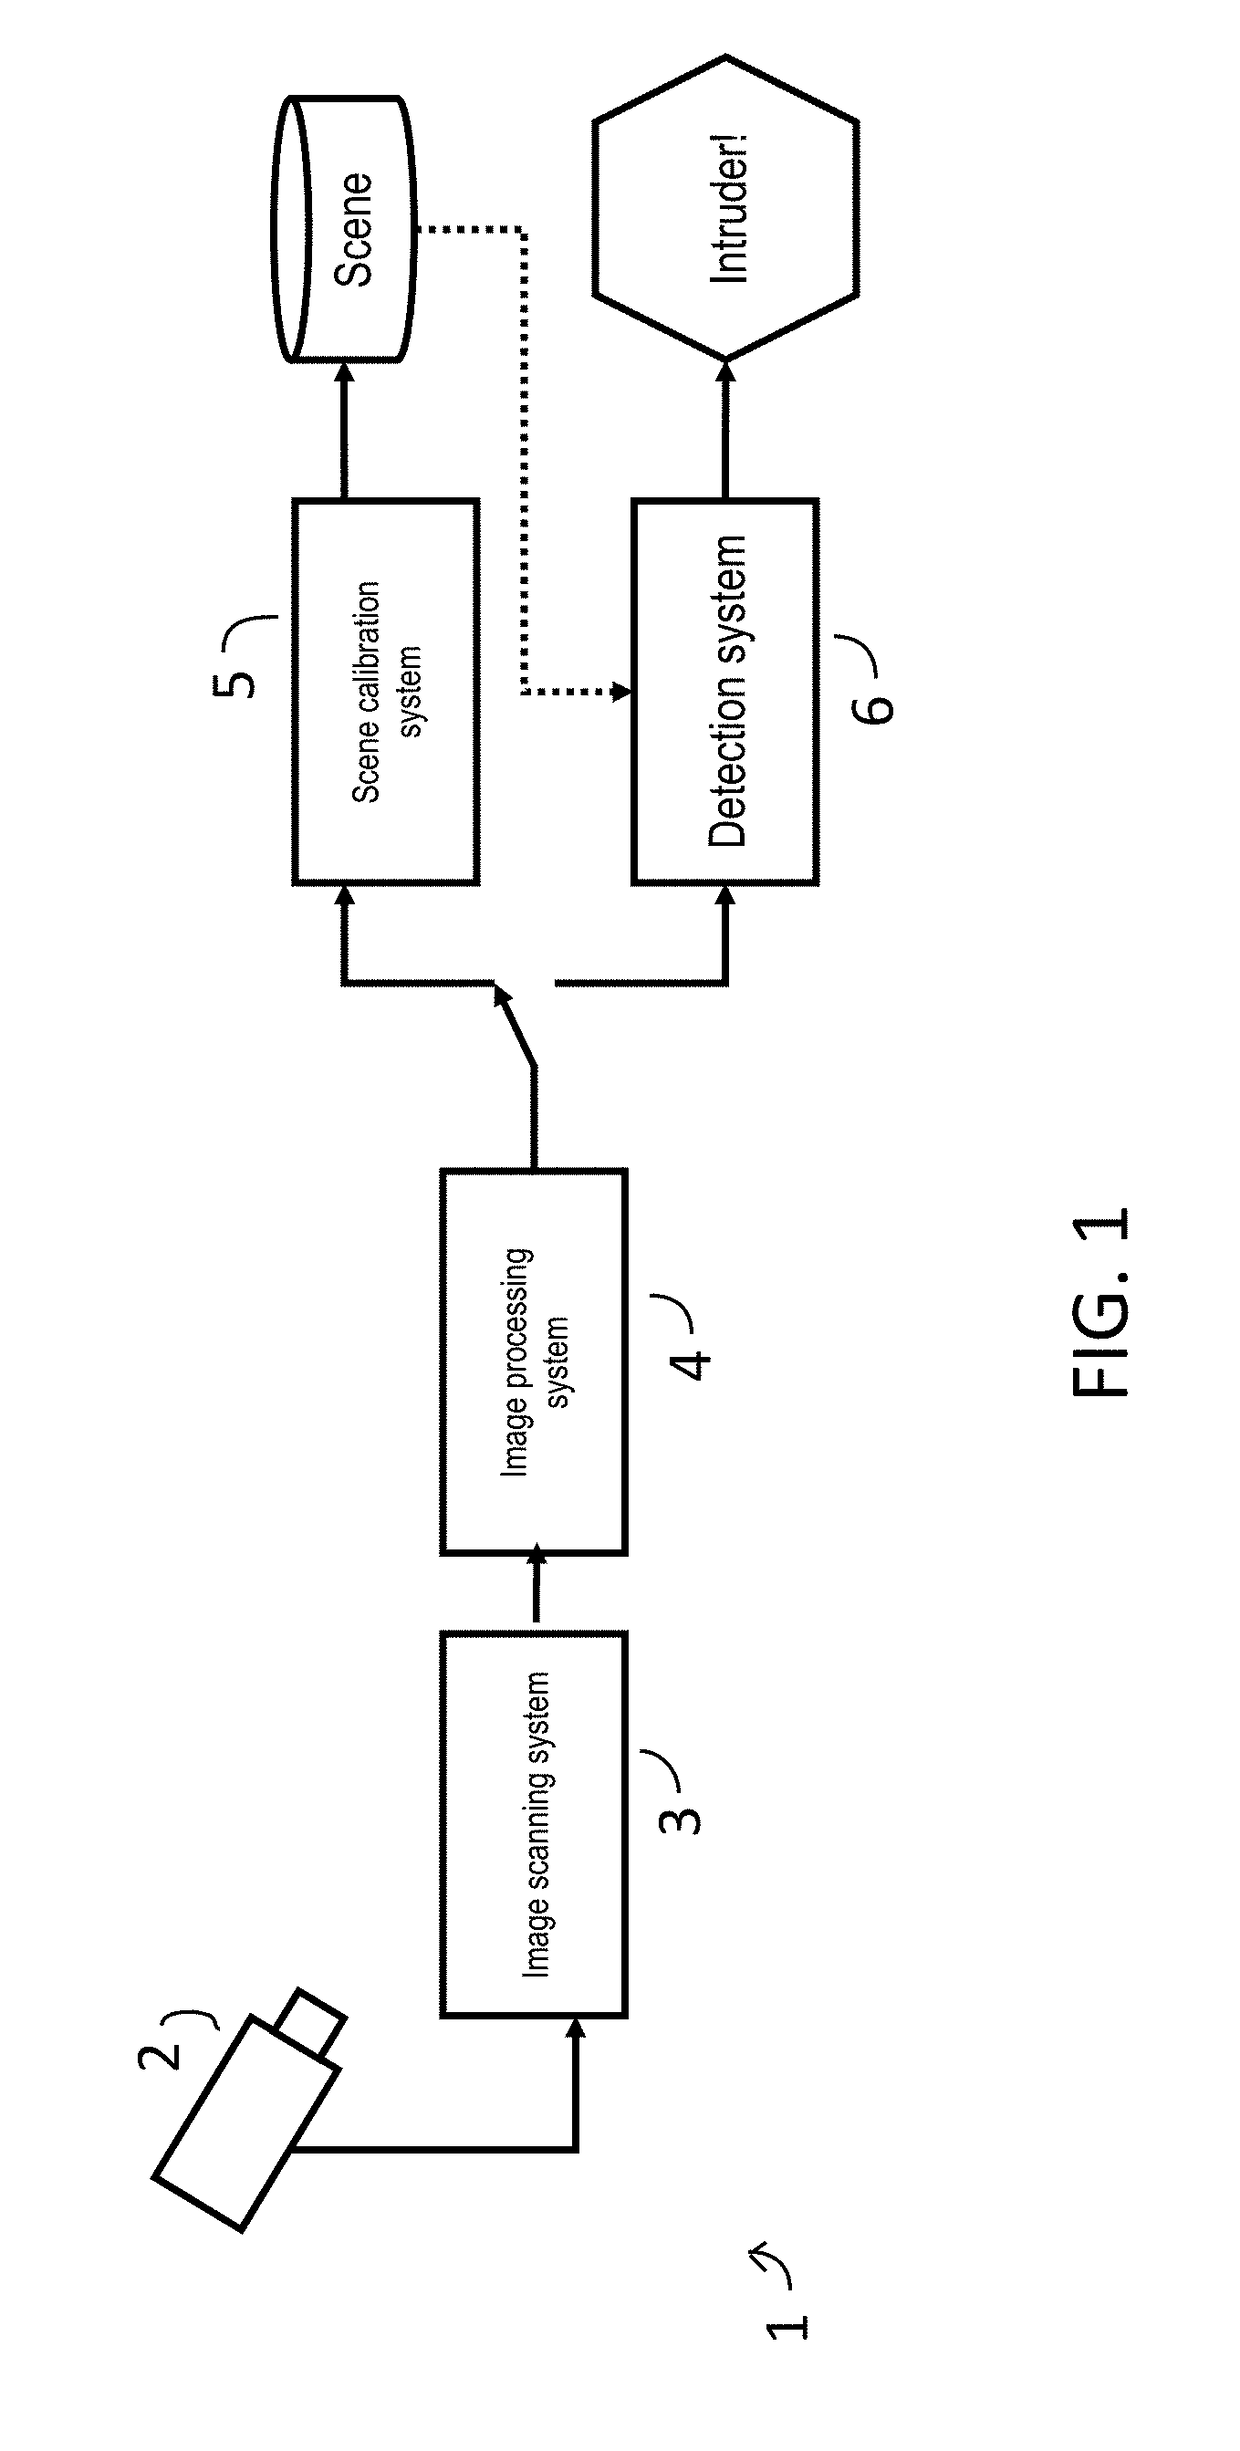 Ir or thermal image enhancement method based on background information for video analysis